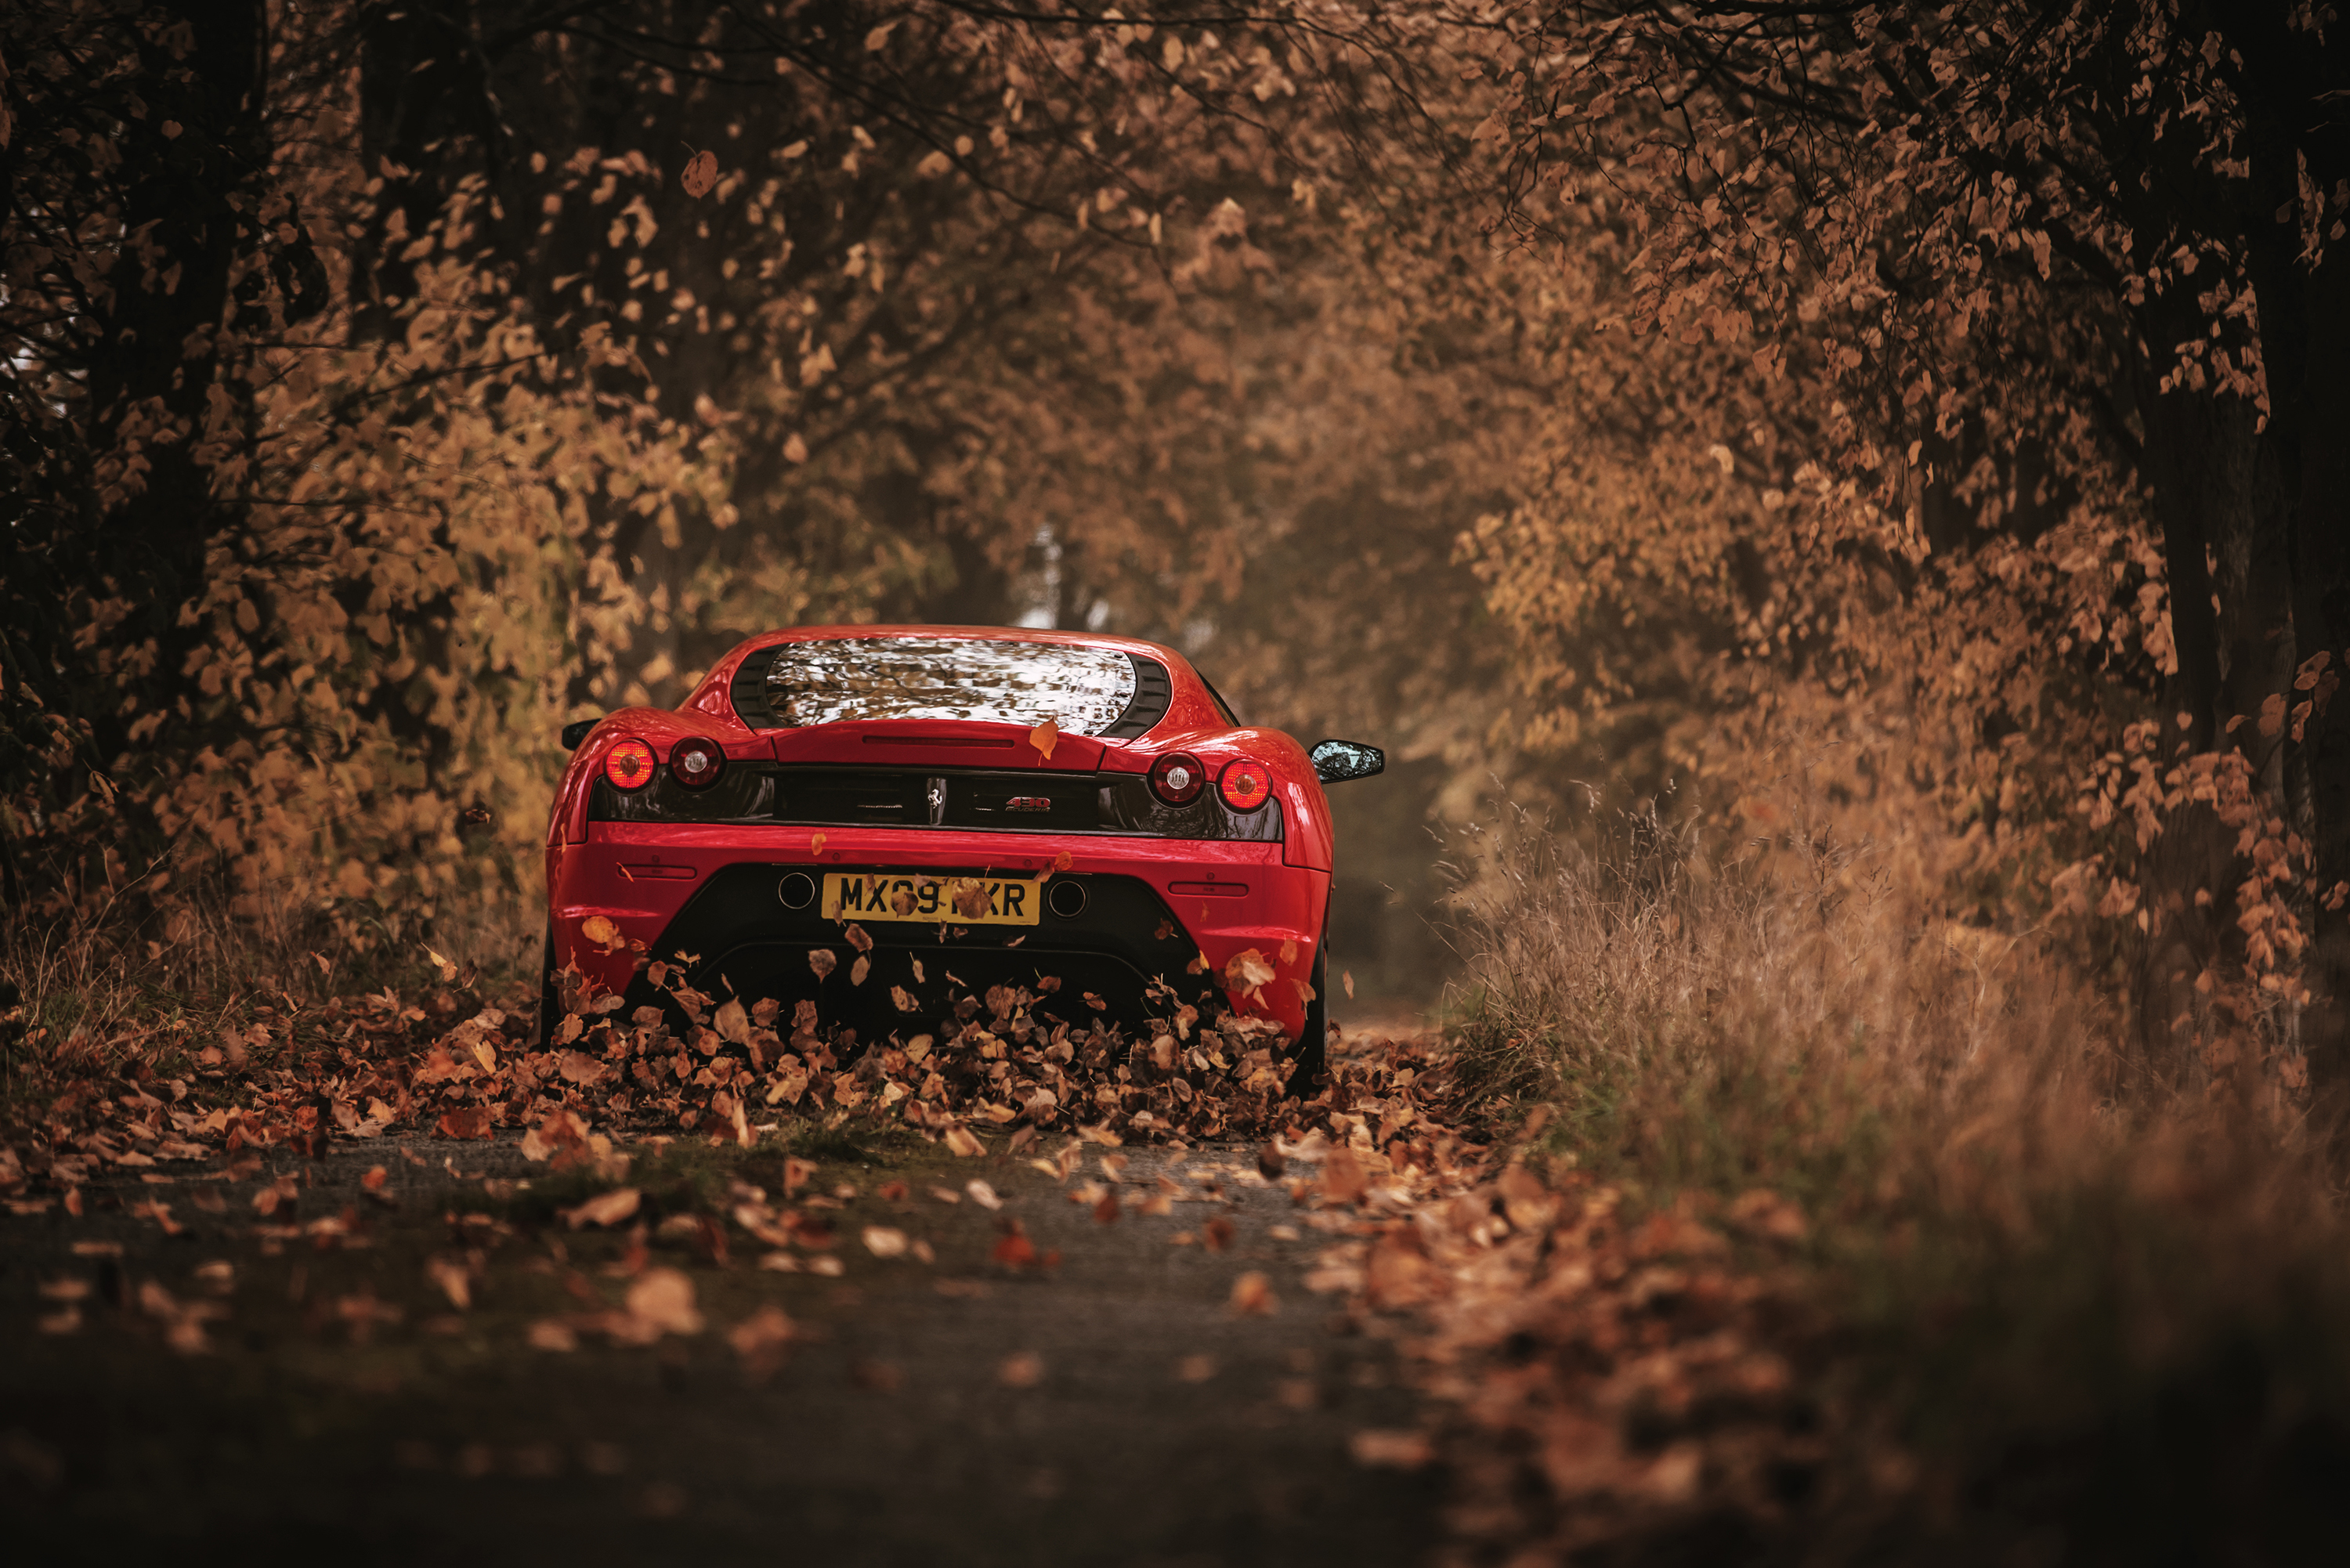 cars, back view, ferrari, autumn, rear view, red, racing, scuderia cell phone wallpapers